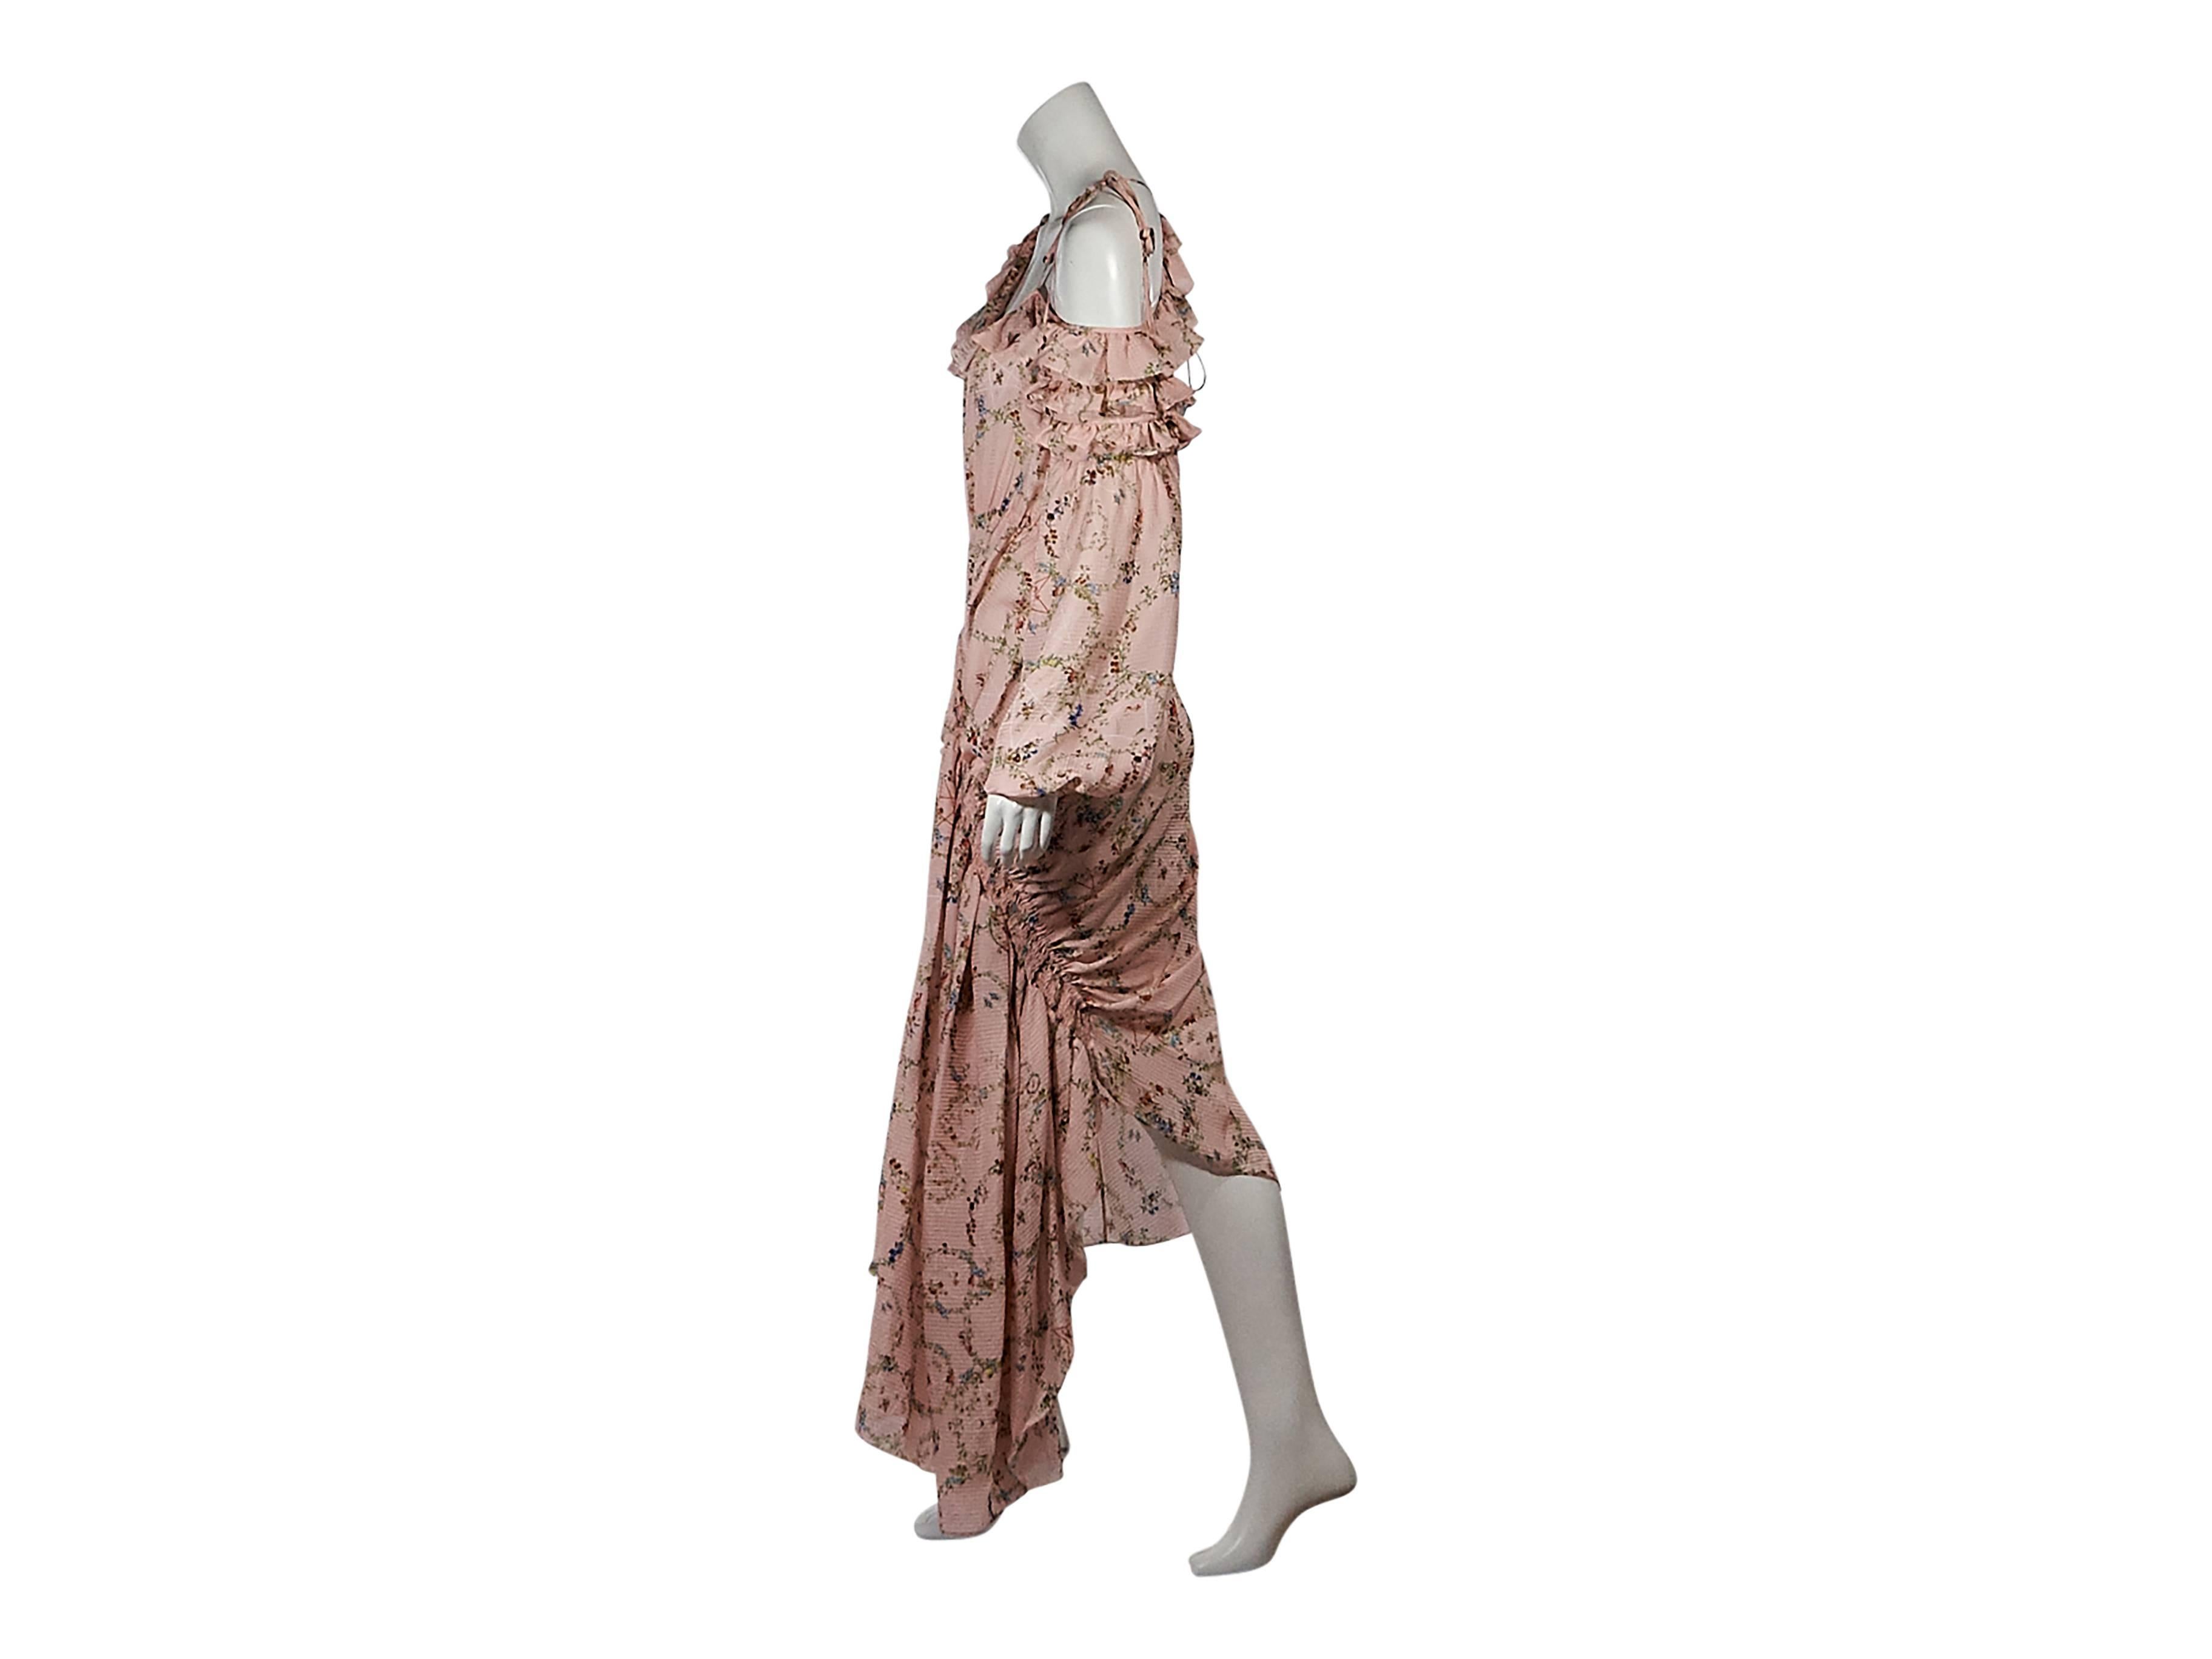 Product details: Pink floral-printed asymmetrical dress by Preen by Thornton Bregazzi. Accented with ruffles. Scoopneck. Long sleeves. Single cold shoulder. Asymmetrical stretch waist. Side gathered hem. Pullover style. 
Condition: Pre-owned. Very